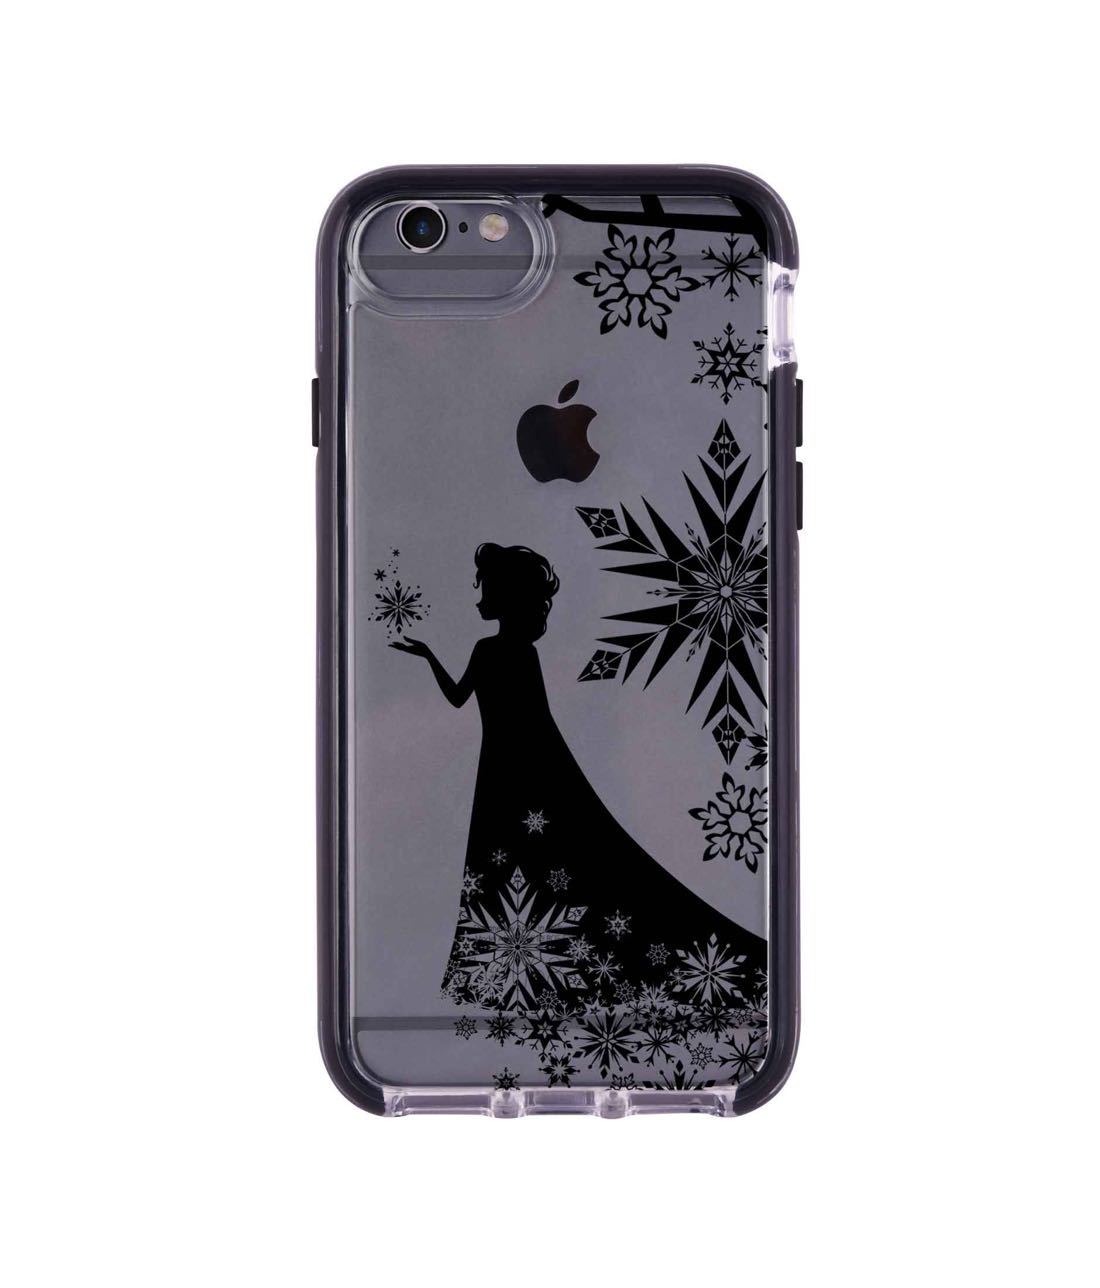 Elsa Silhouette - Extreme Phone Case for iPhone 6S Plus